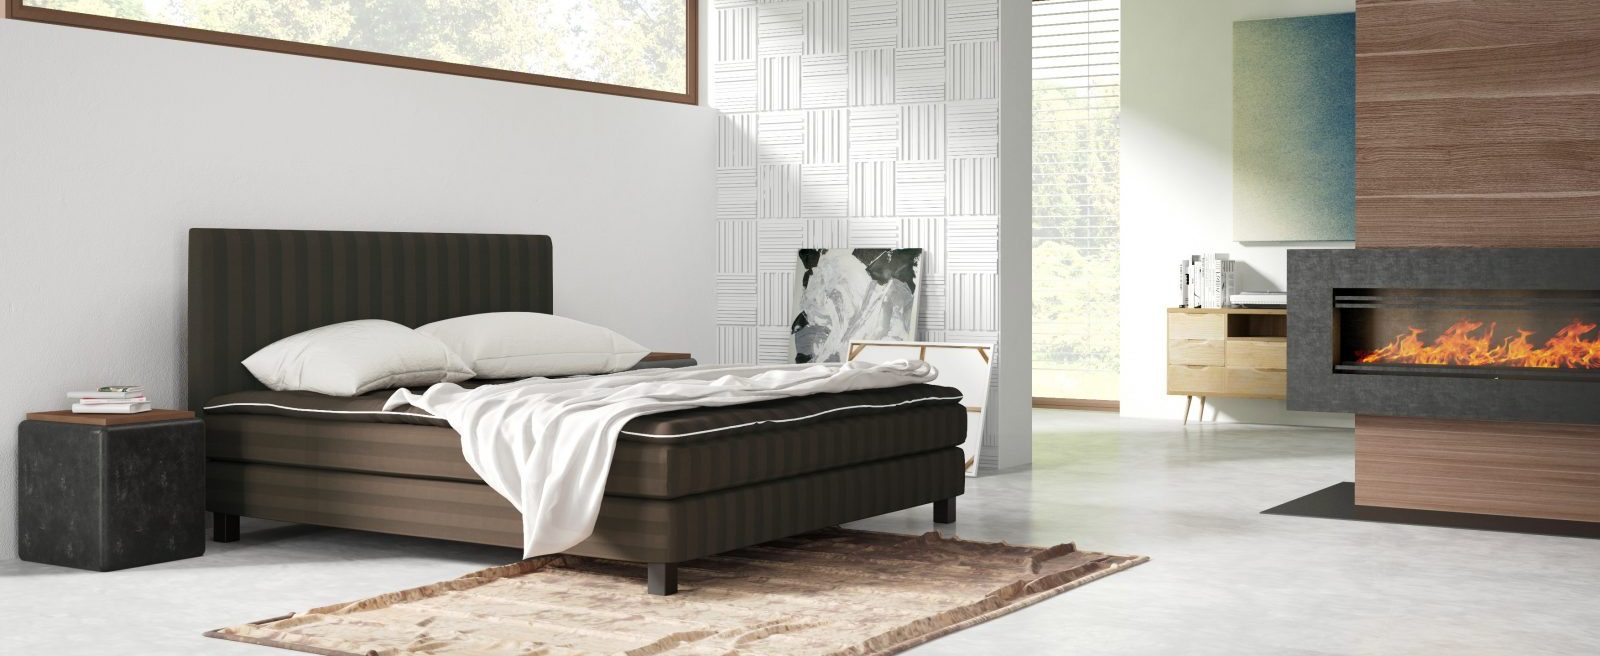 pauly-beds-continental-luxury-mattress-catherine-small